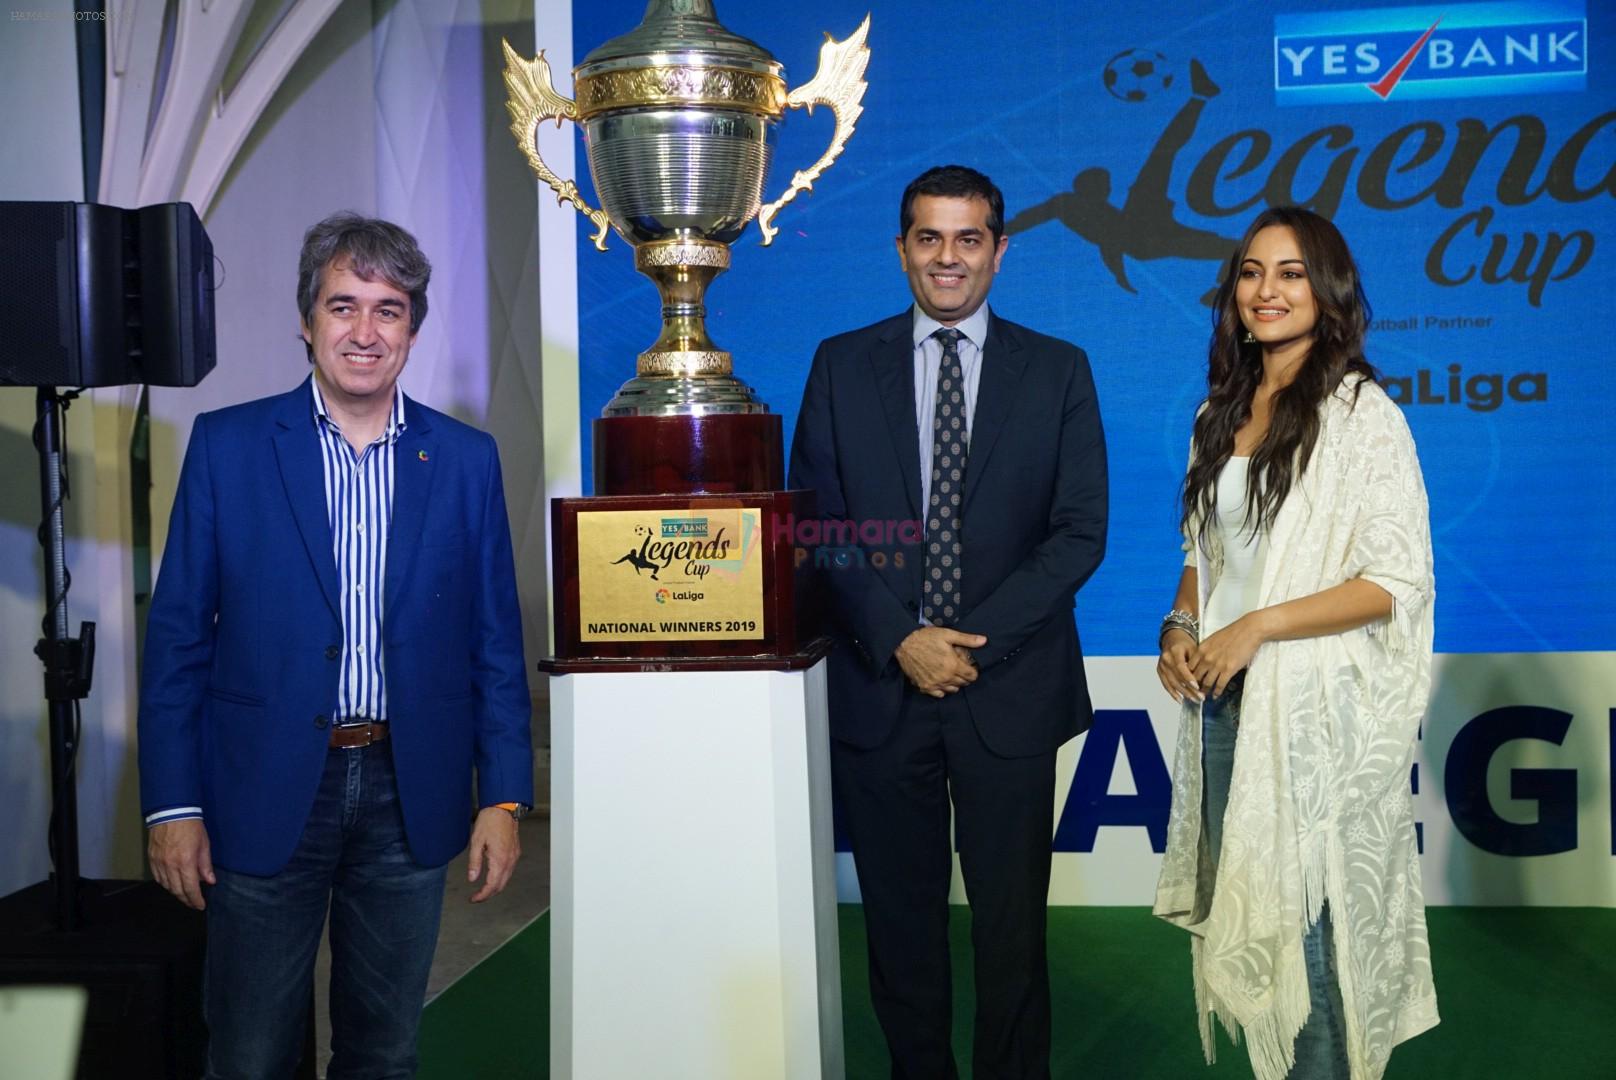 Sonakshi Sinha at the launch of india's largest corporate football tournament Legends Cup in Tote racecourse on 9th Oct 2018